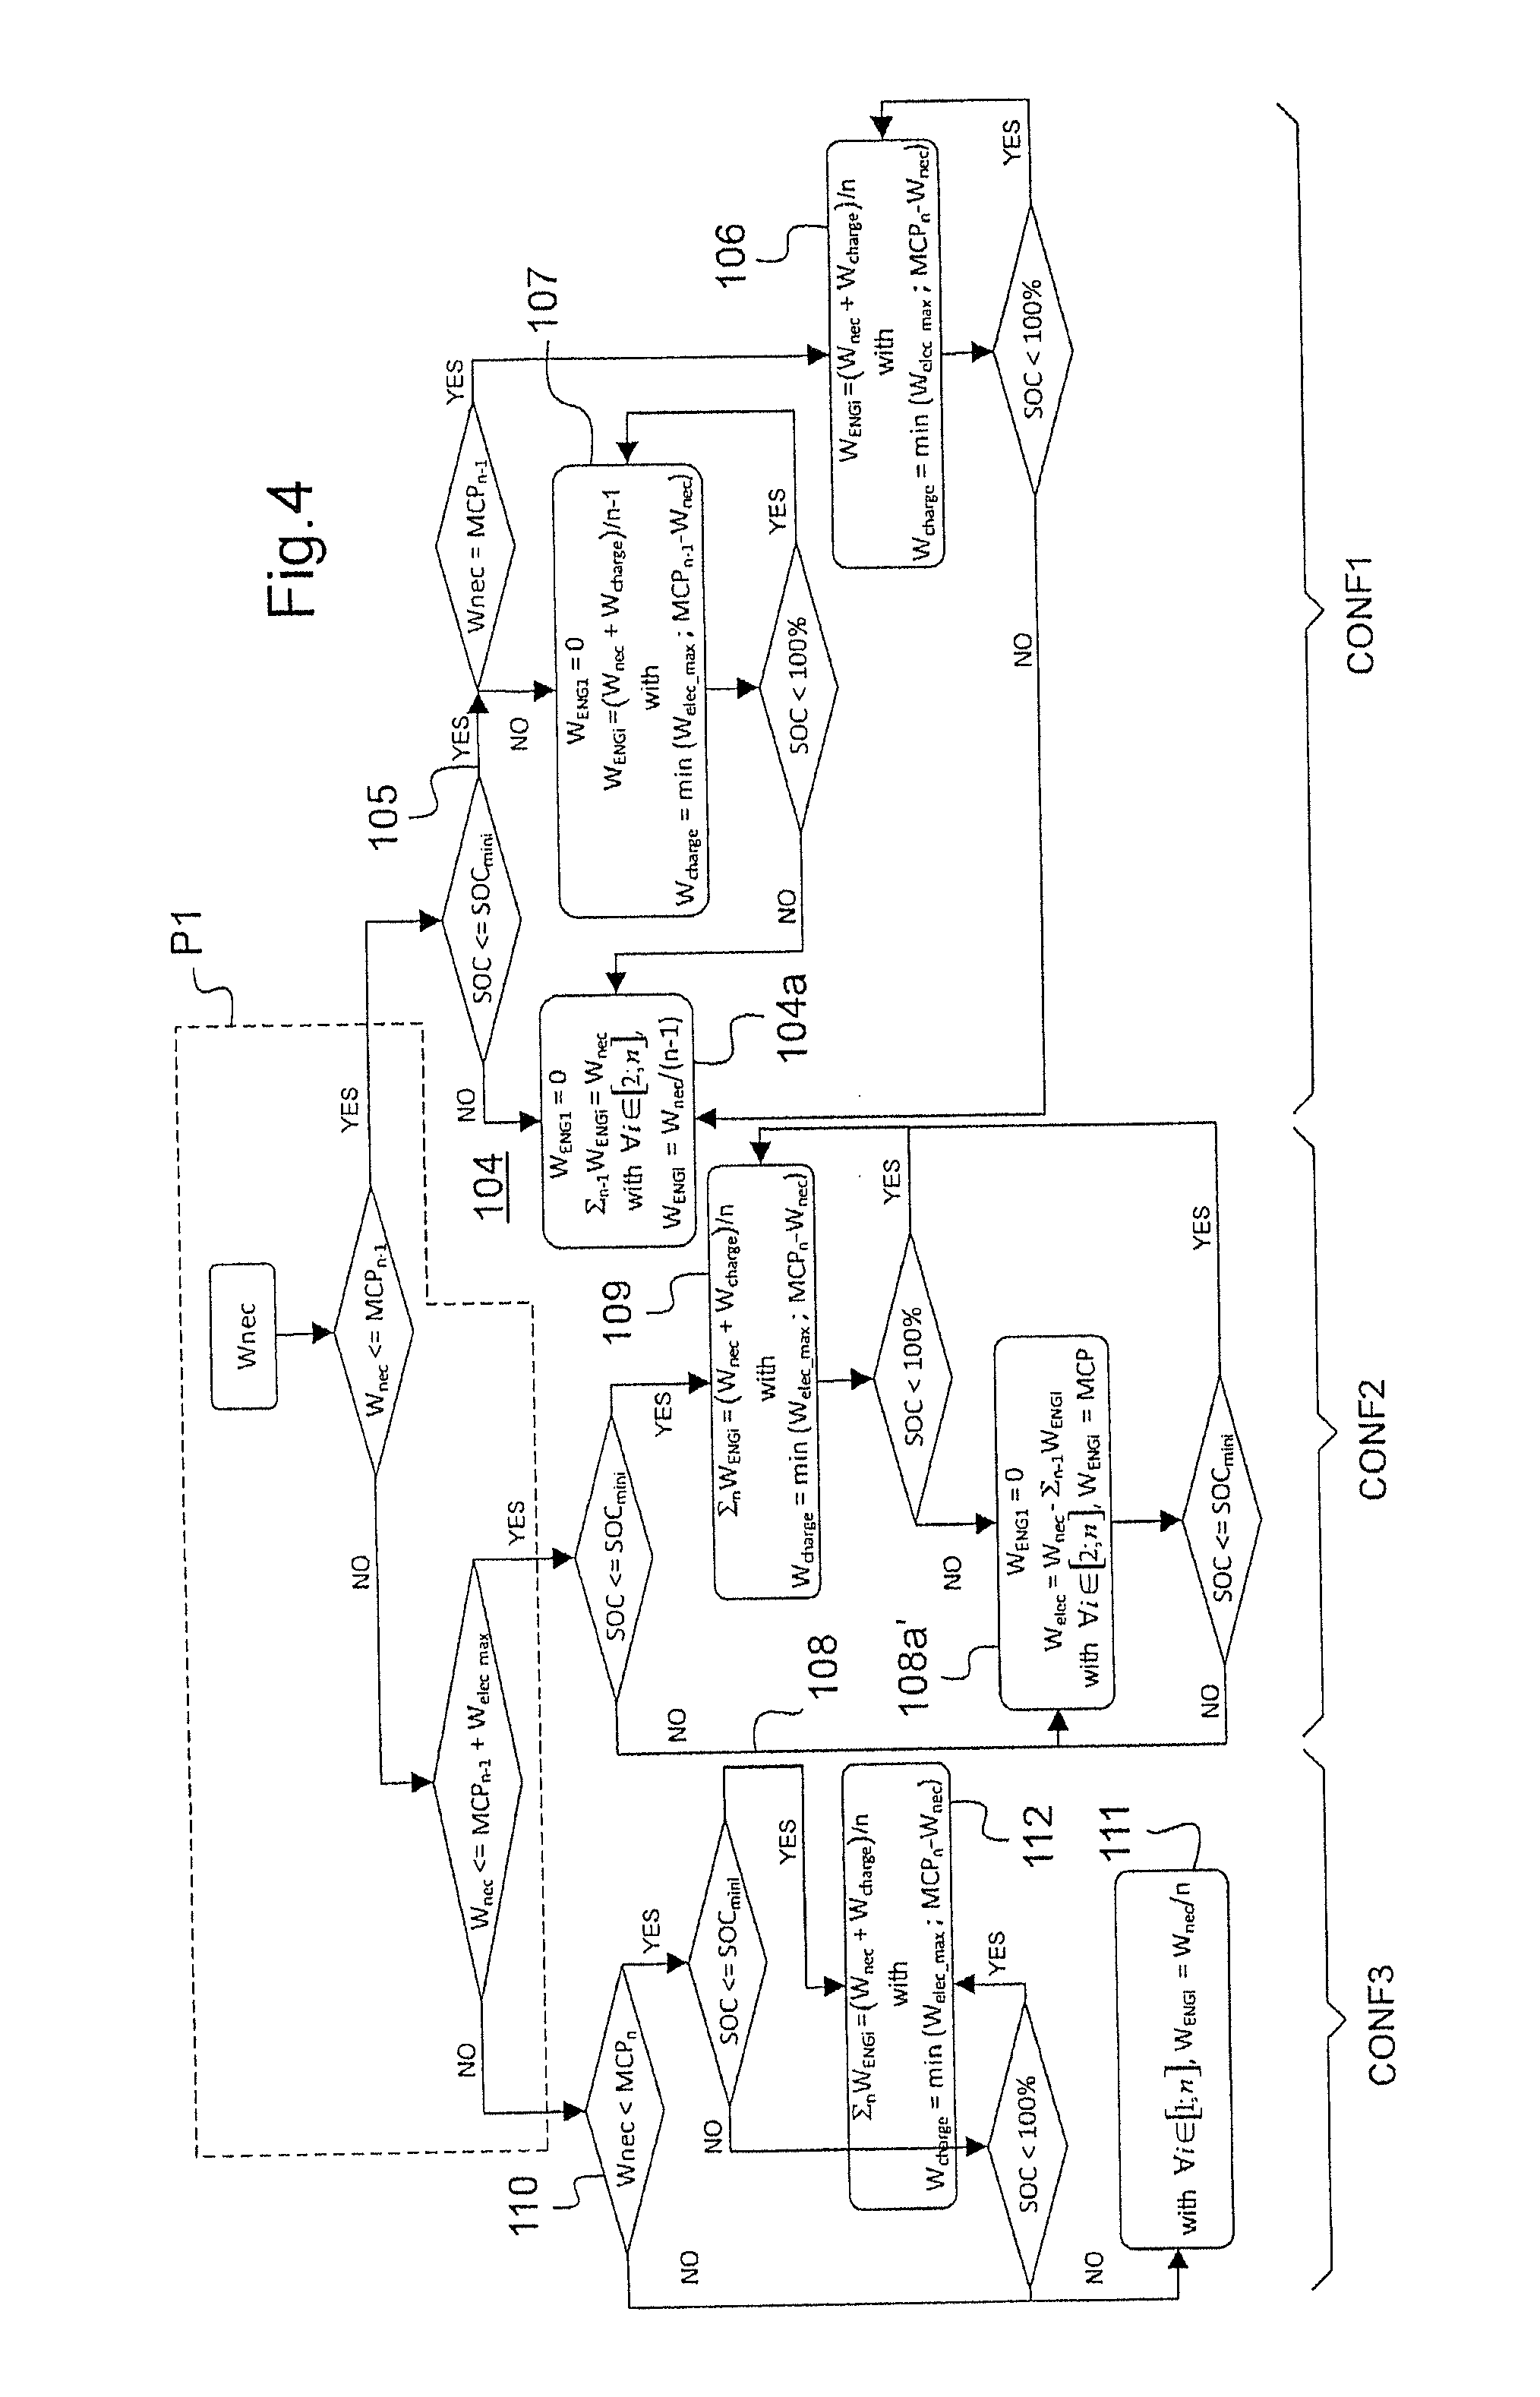 Method of controlling a group of engines, and an aircraft